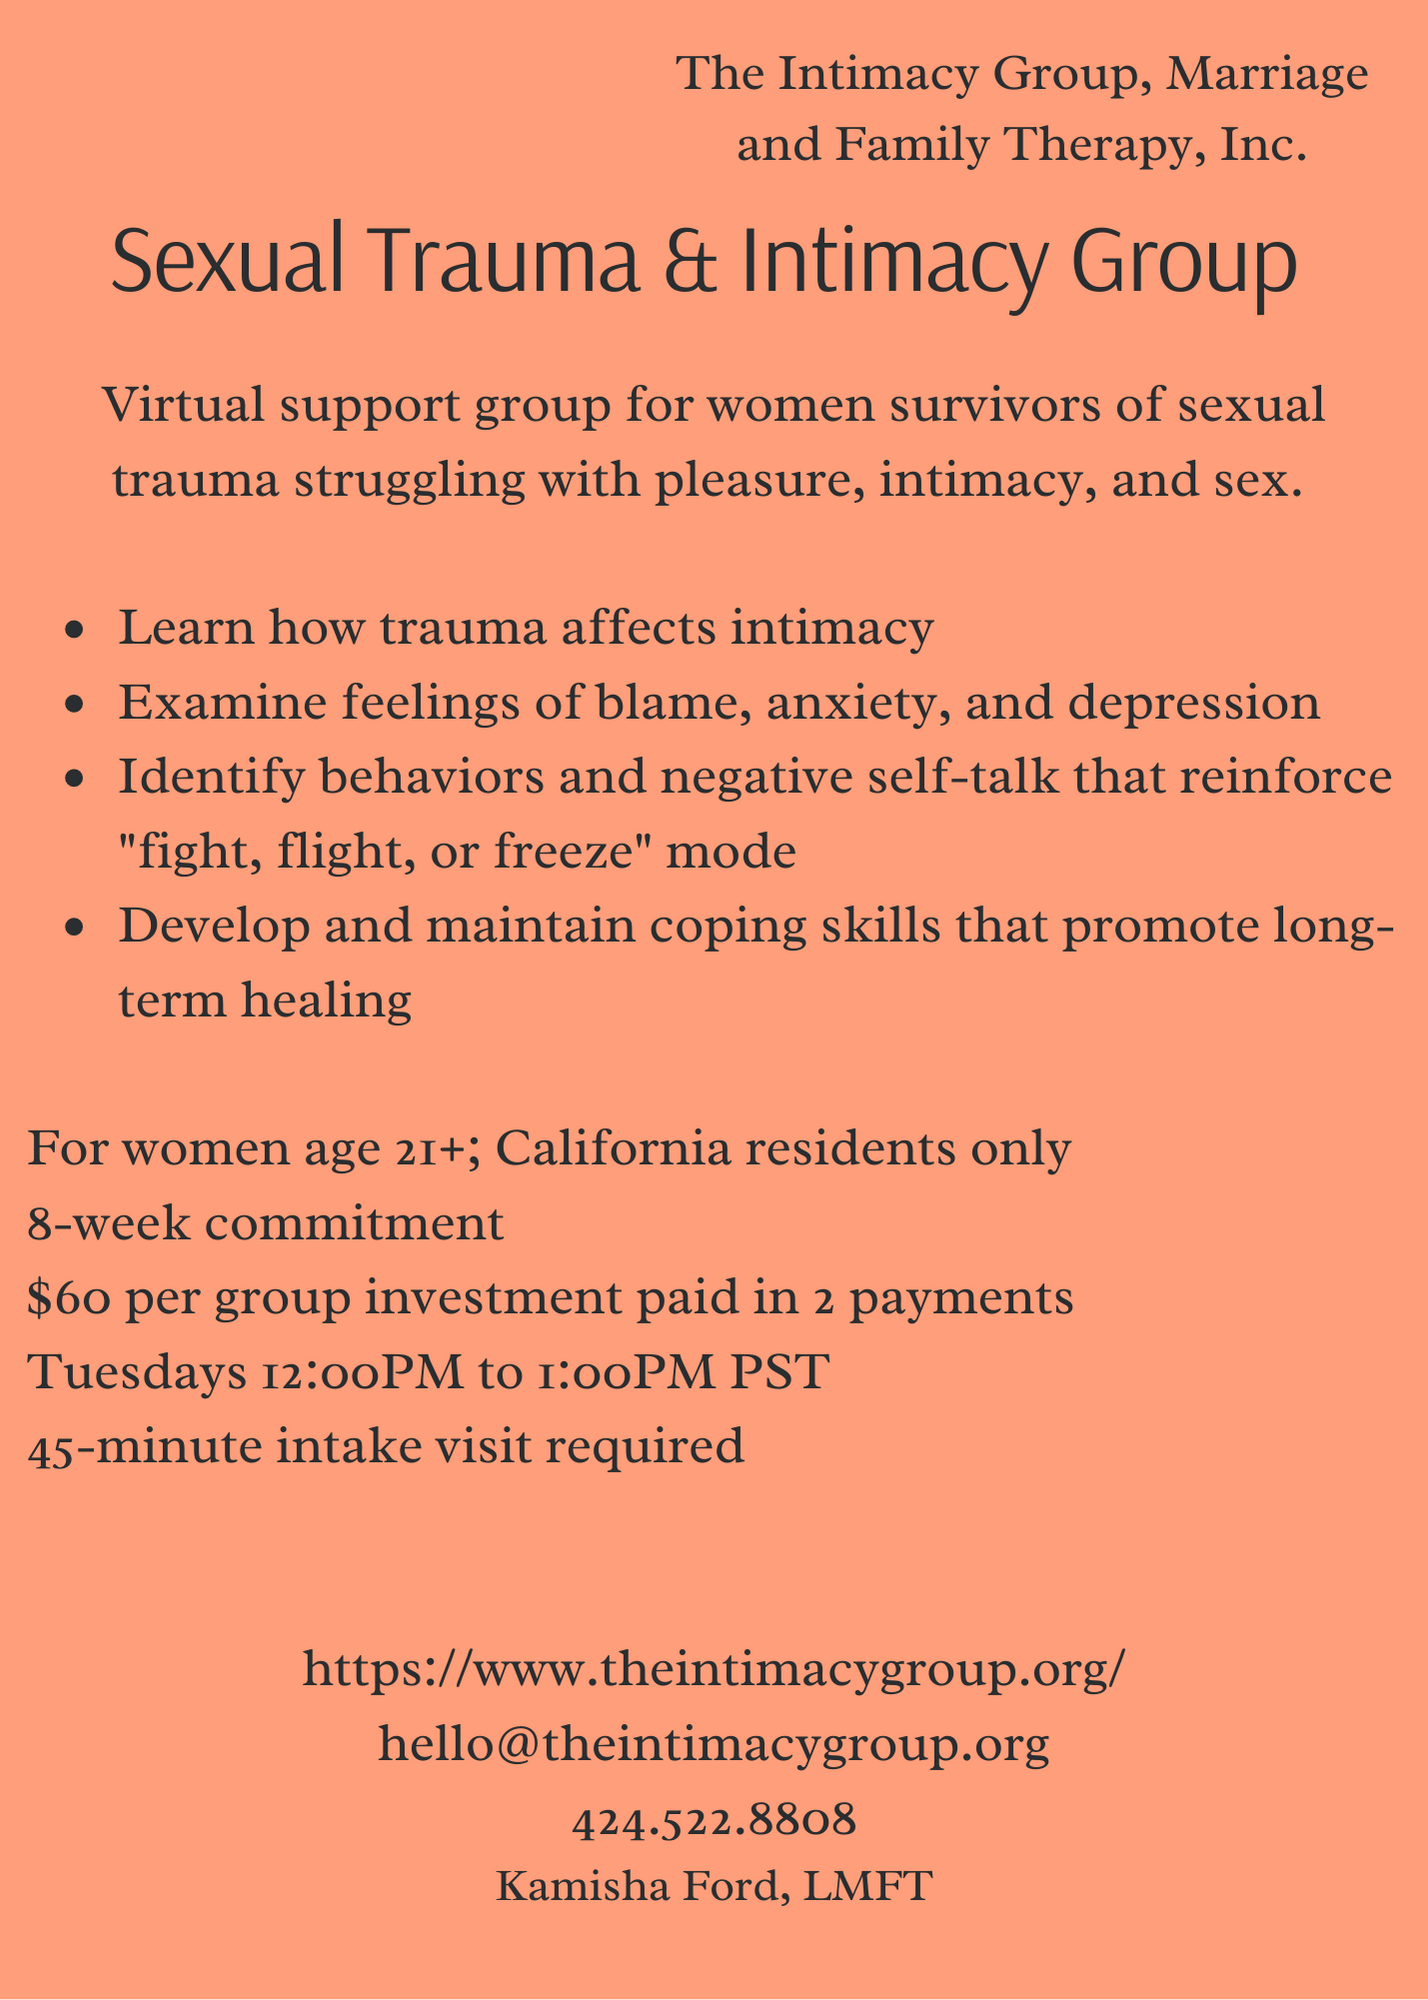 sexual trauma and intimacy group flyer